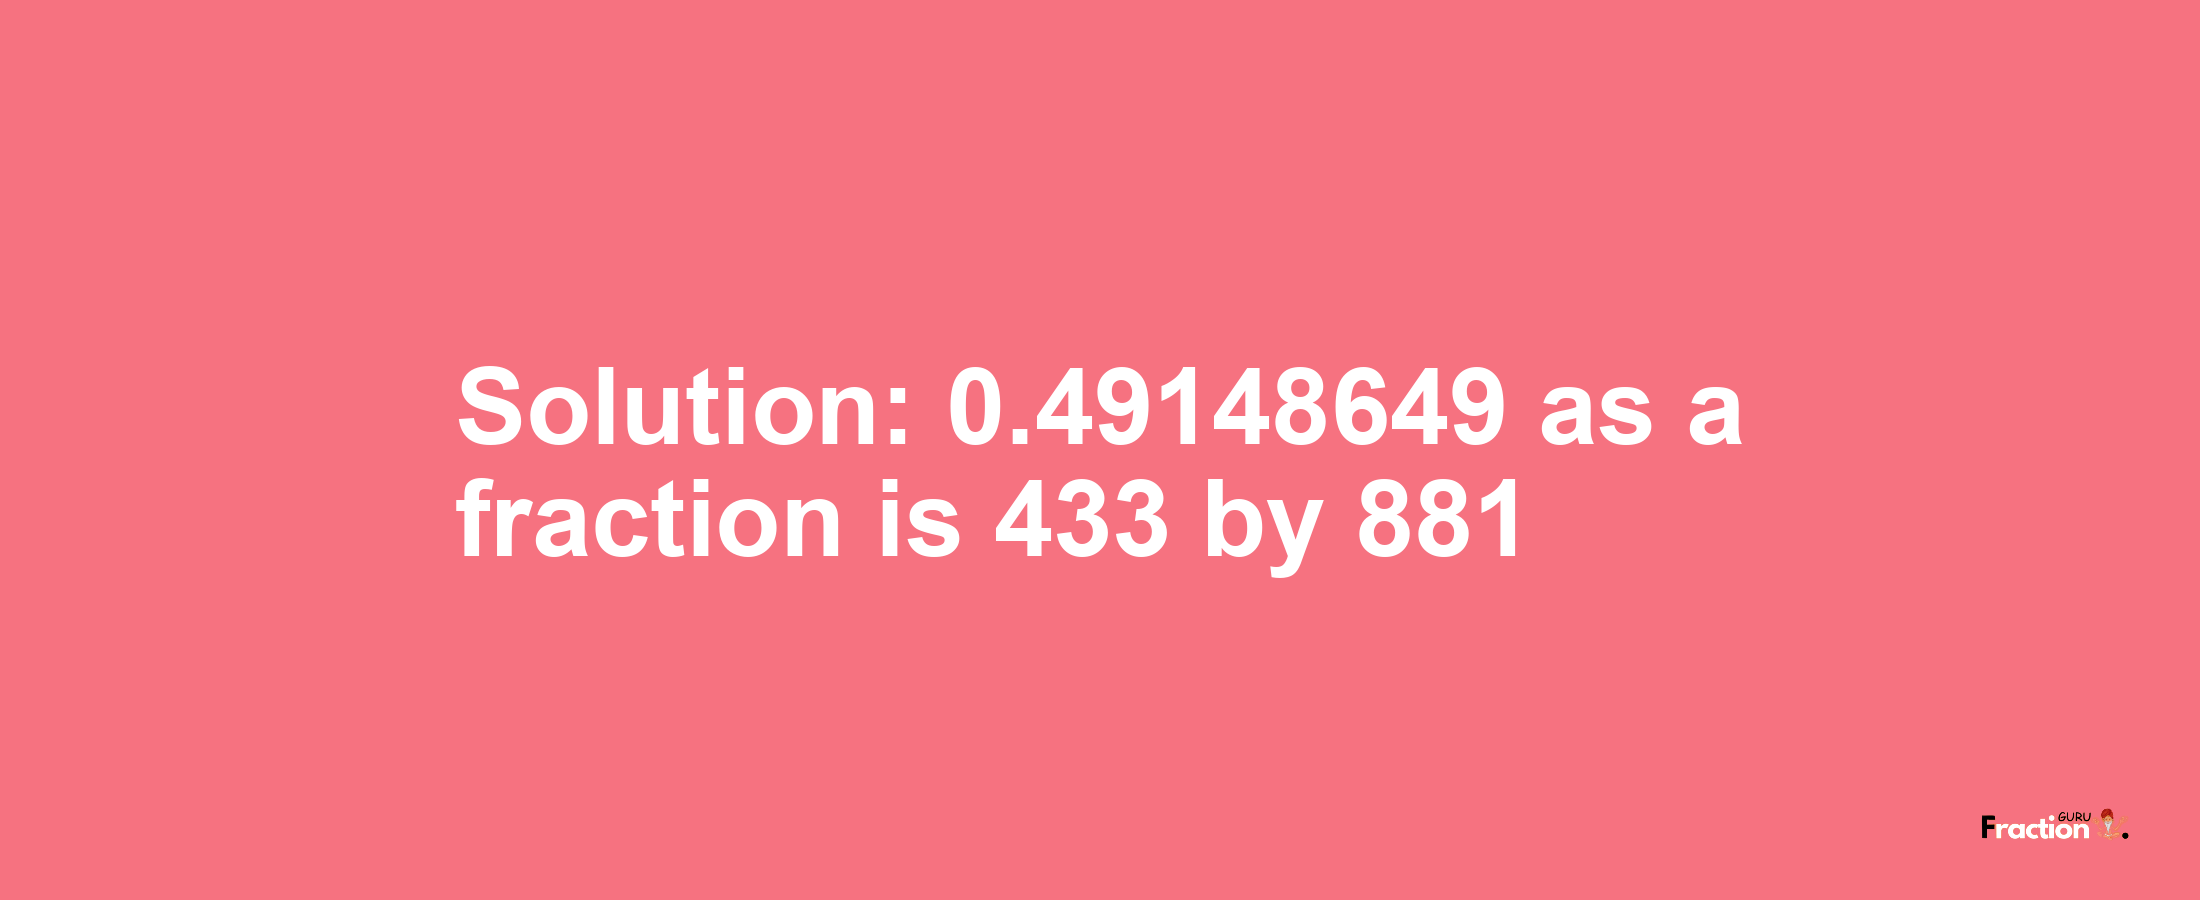 Solution:0.49148649 as a fraction is 433/881